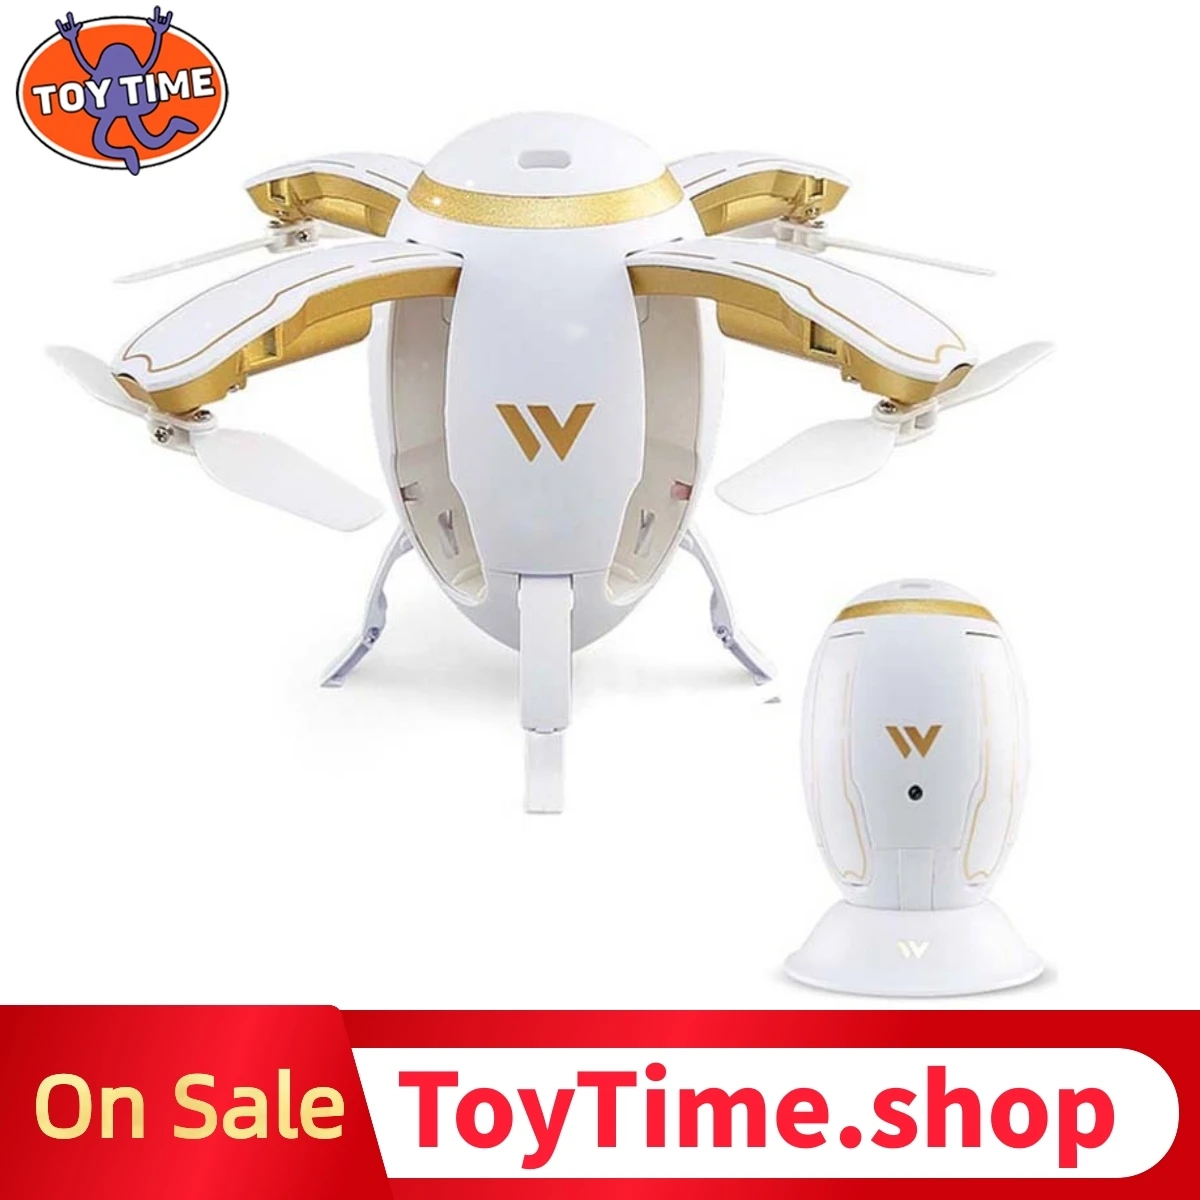 

ToyTime RC Quadcopter Selfie Drone WIFI FPV Foldable Fly Egg Drone W5 2.4GHz 0.3MP Camera 4 Channel Altitude Hold Drones Gifts